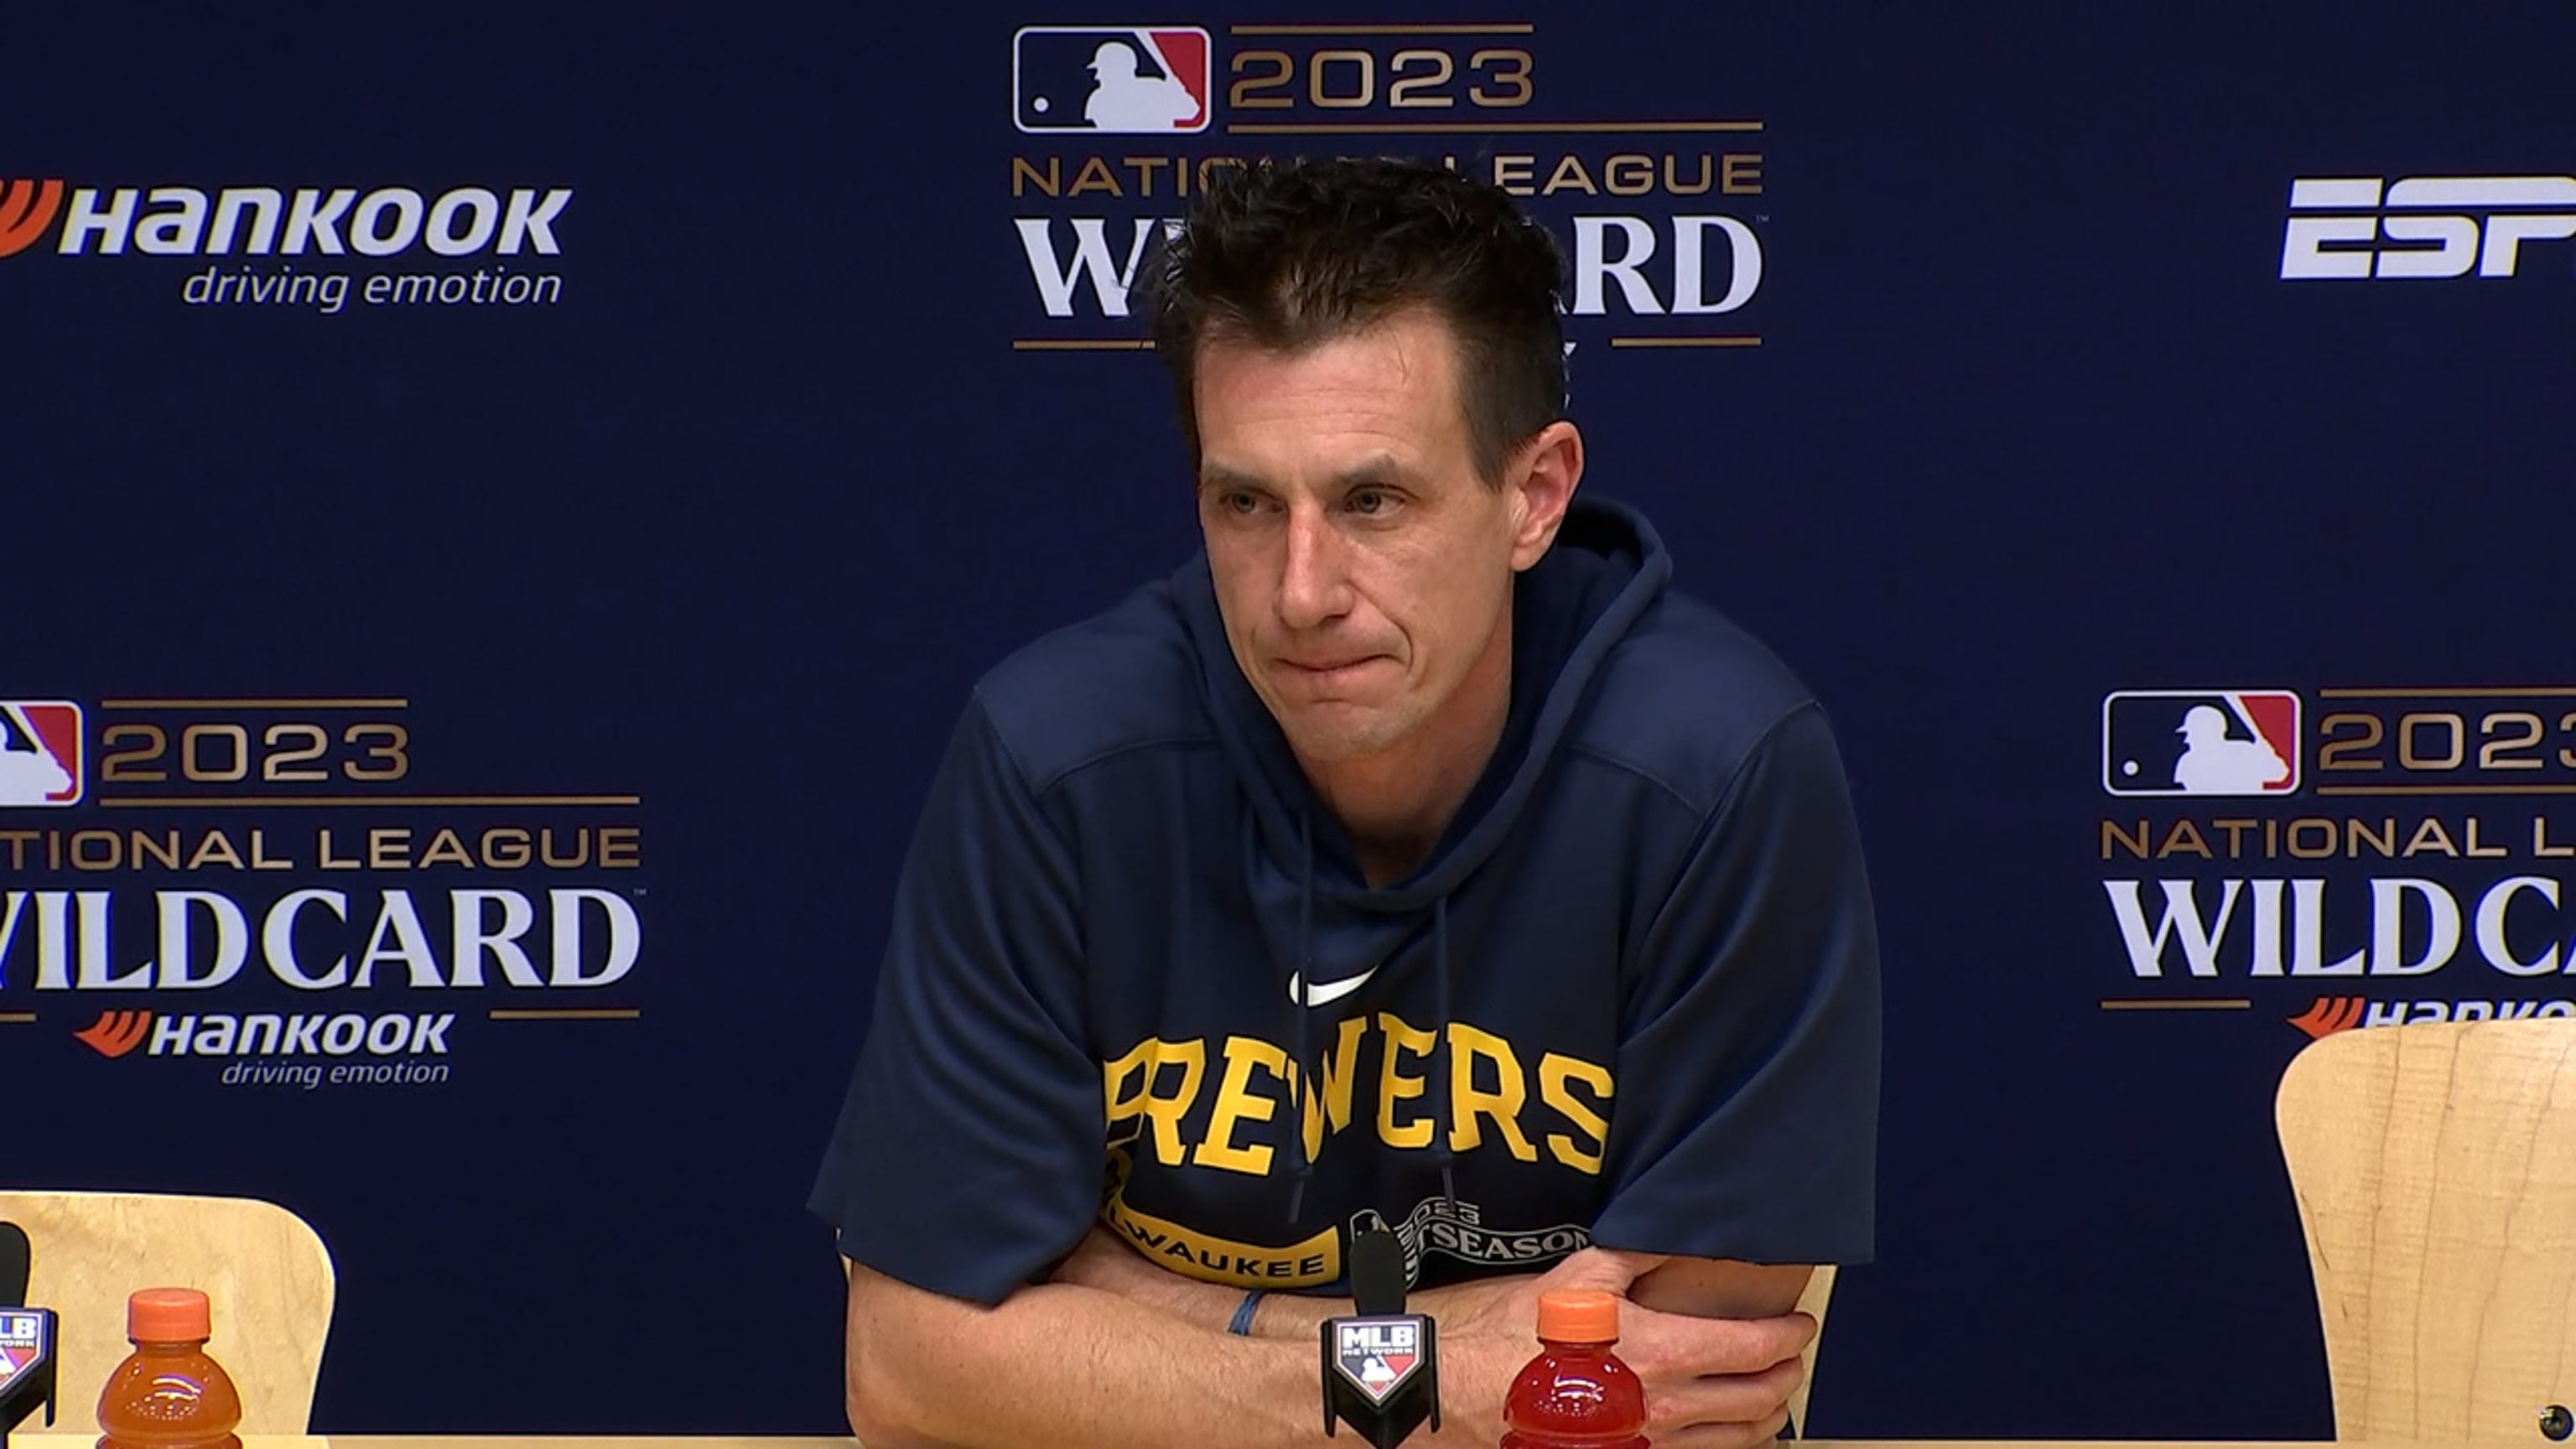 Brewers' Arnold: Counsell, Burnes conversations ongoing